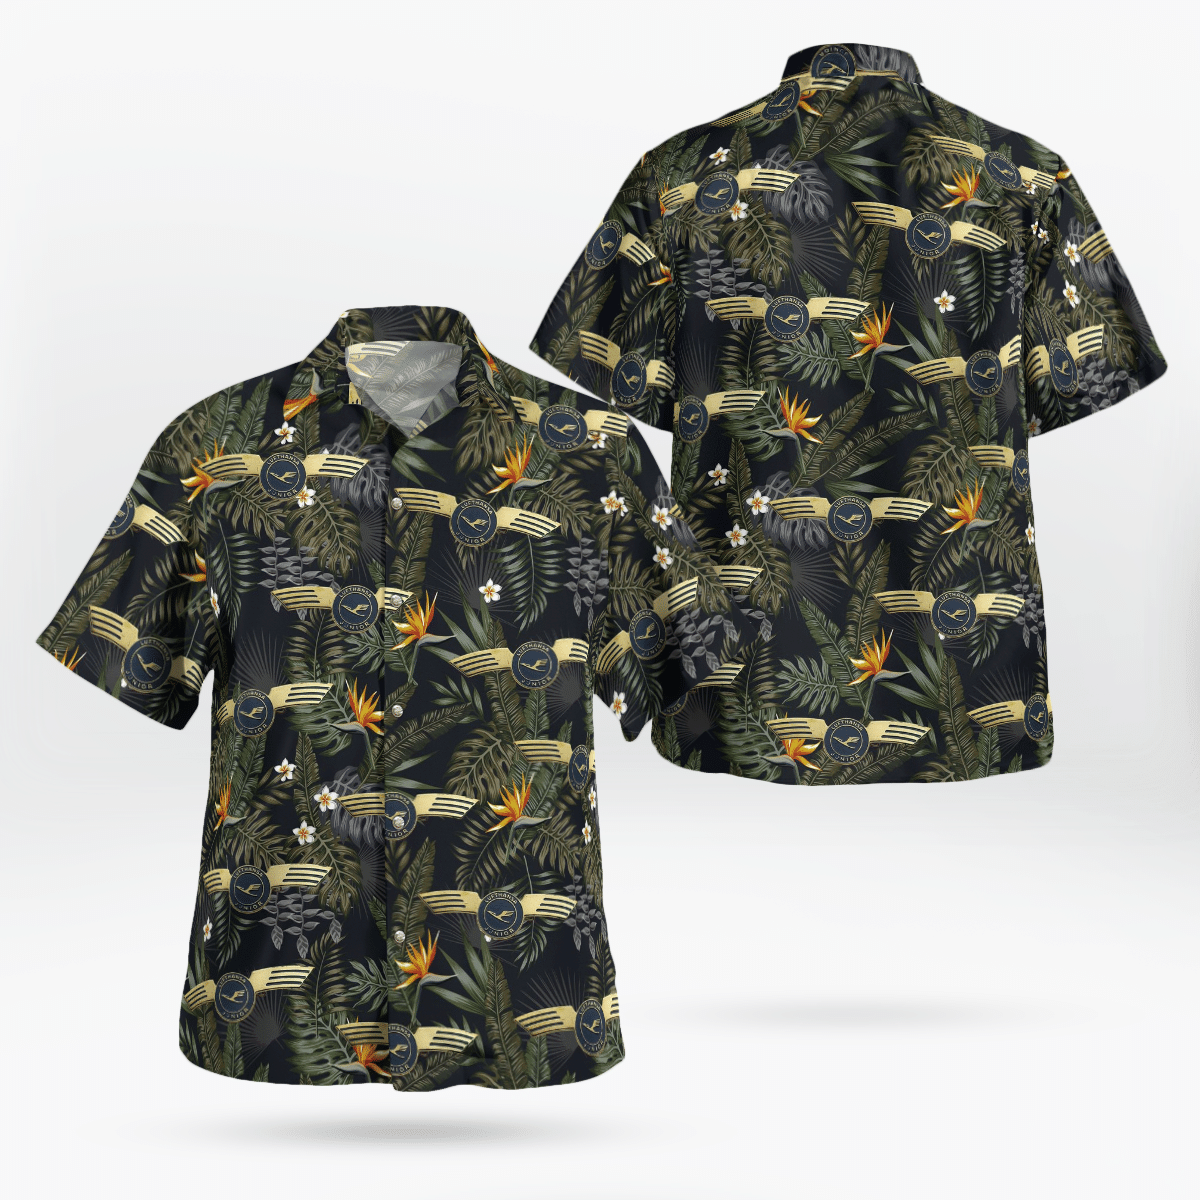 If you are in need of a new summertime look, pick up this Hawaiian shirt 234